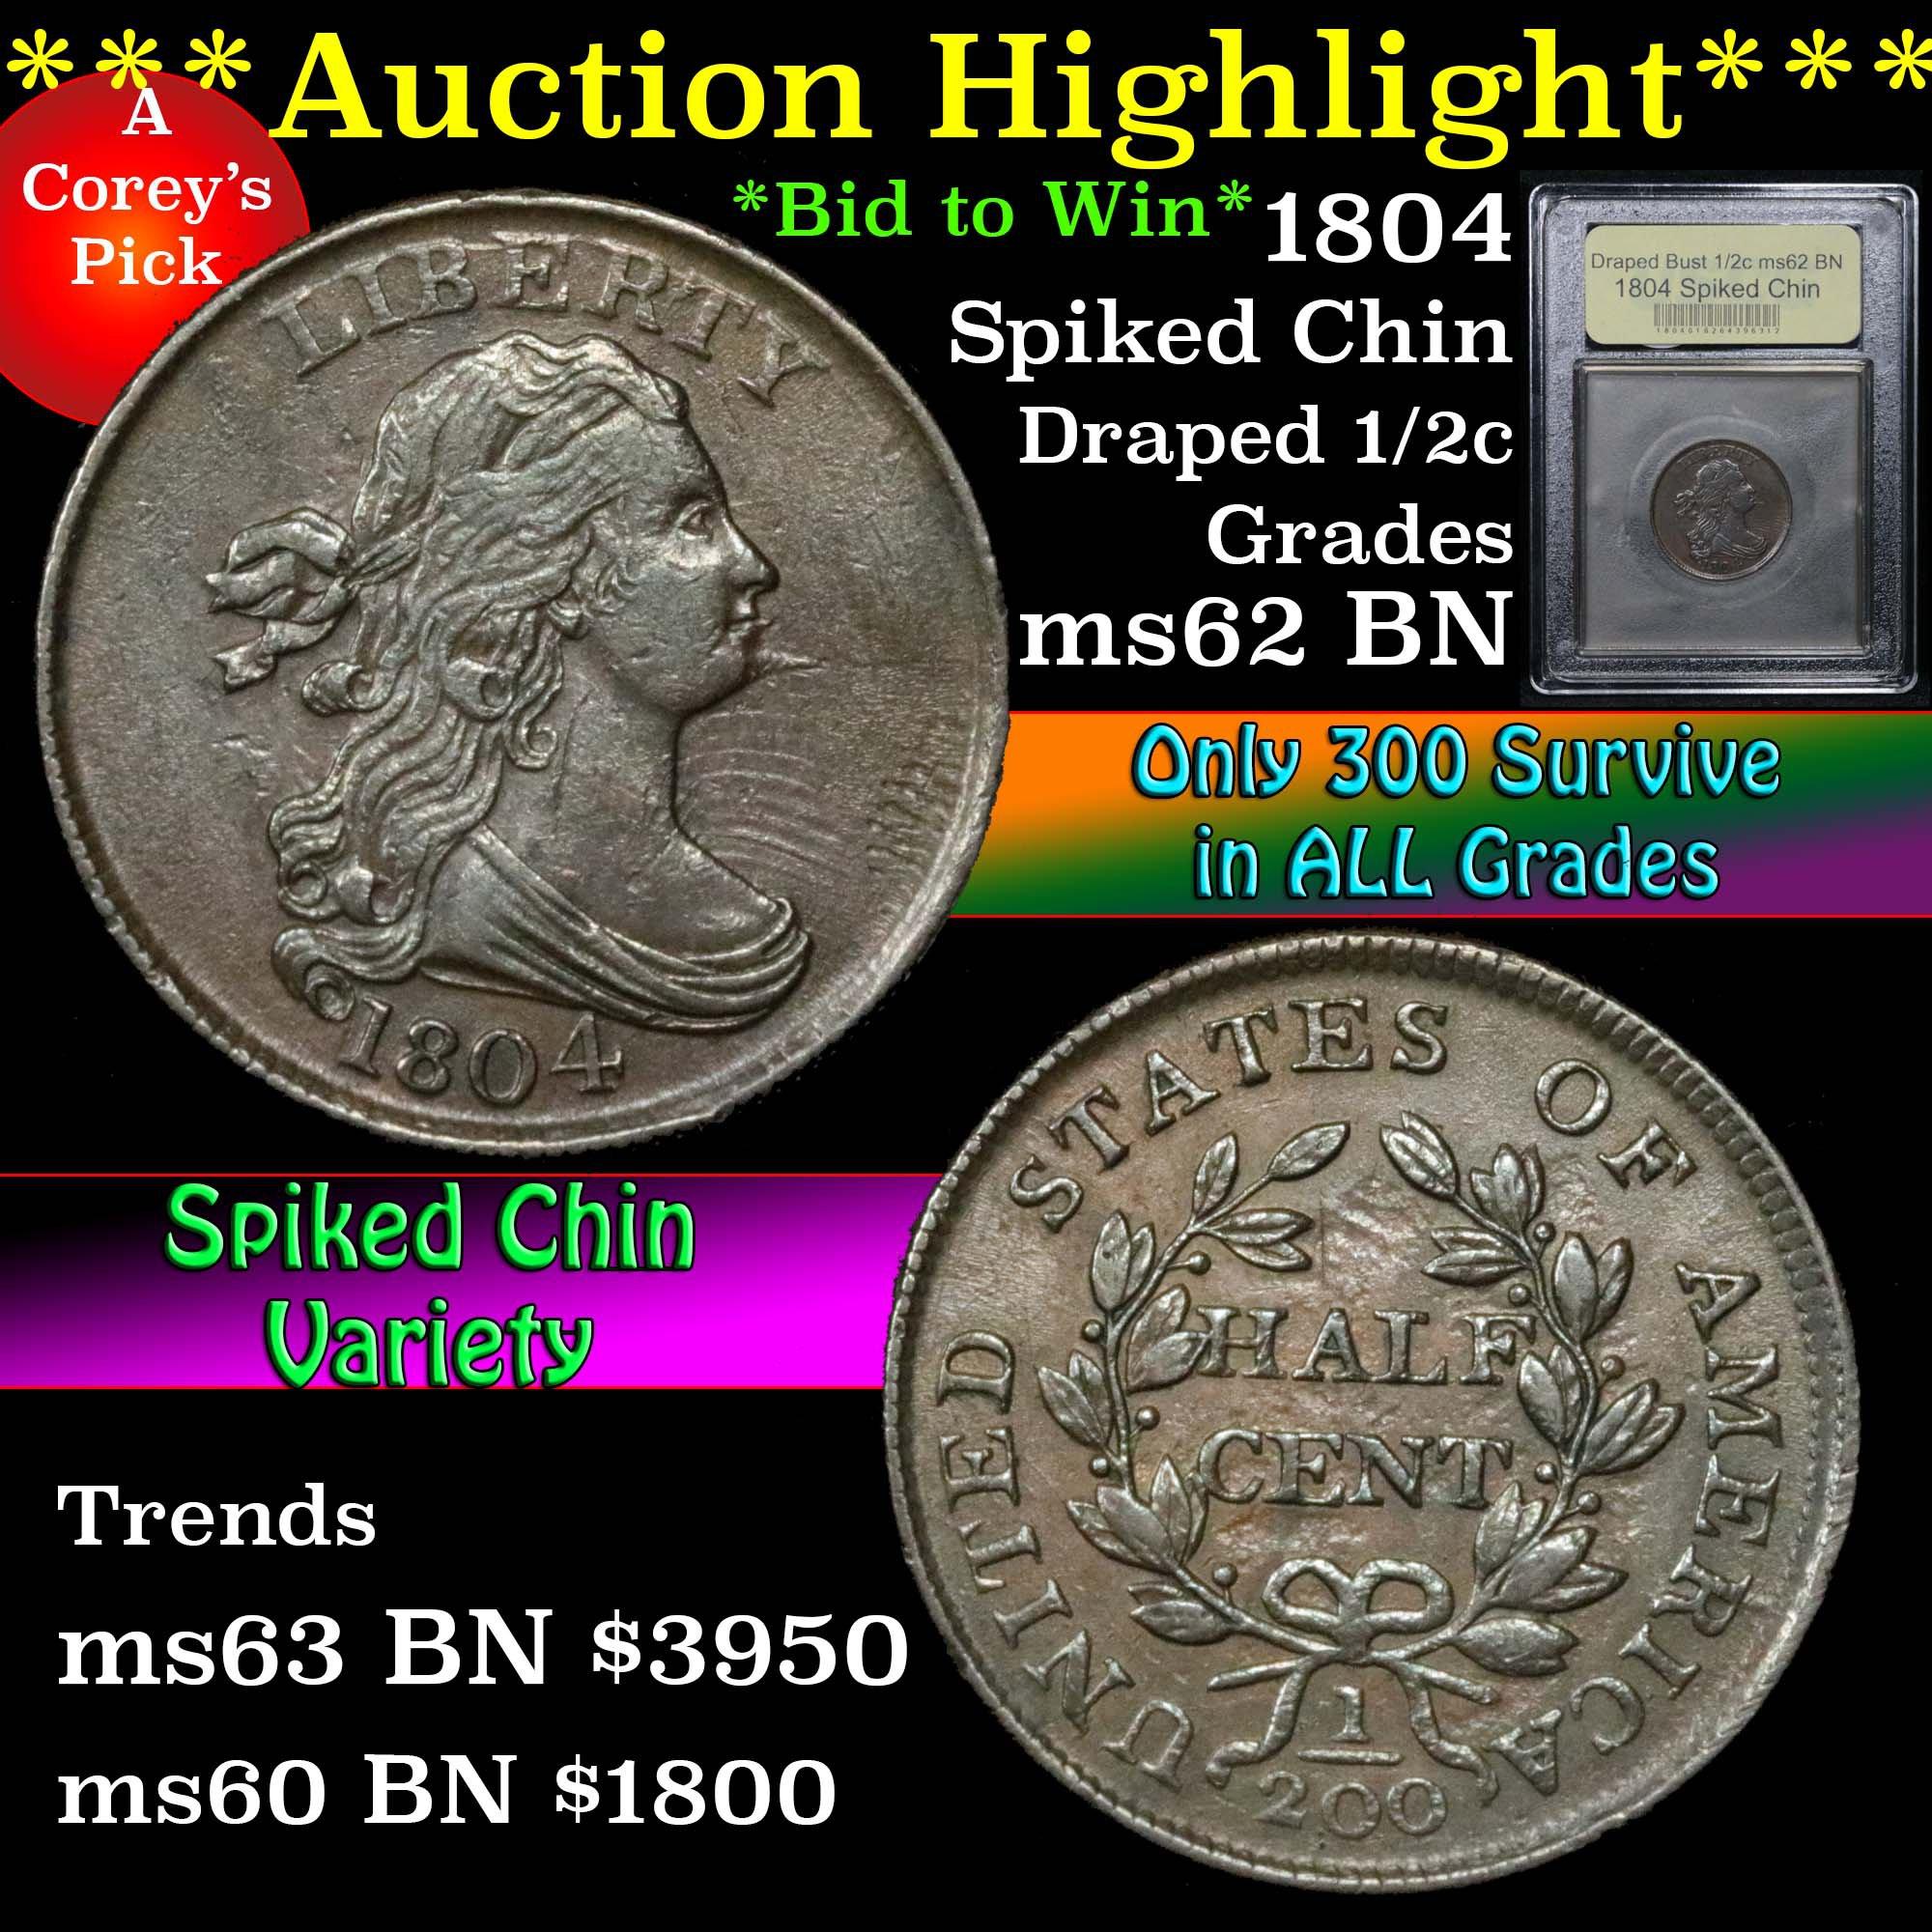 ***Auction Highlight*** 1804 Spiked Chin Draped Bust 1/2c Graded Select Unc BN USCG (fc)